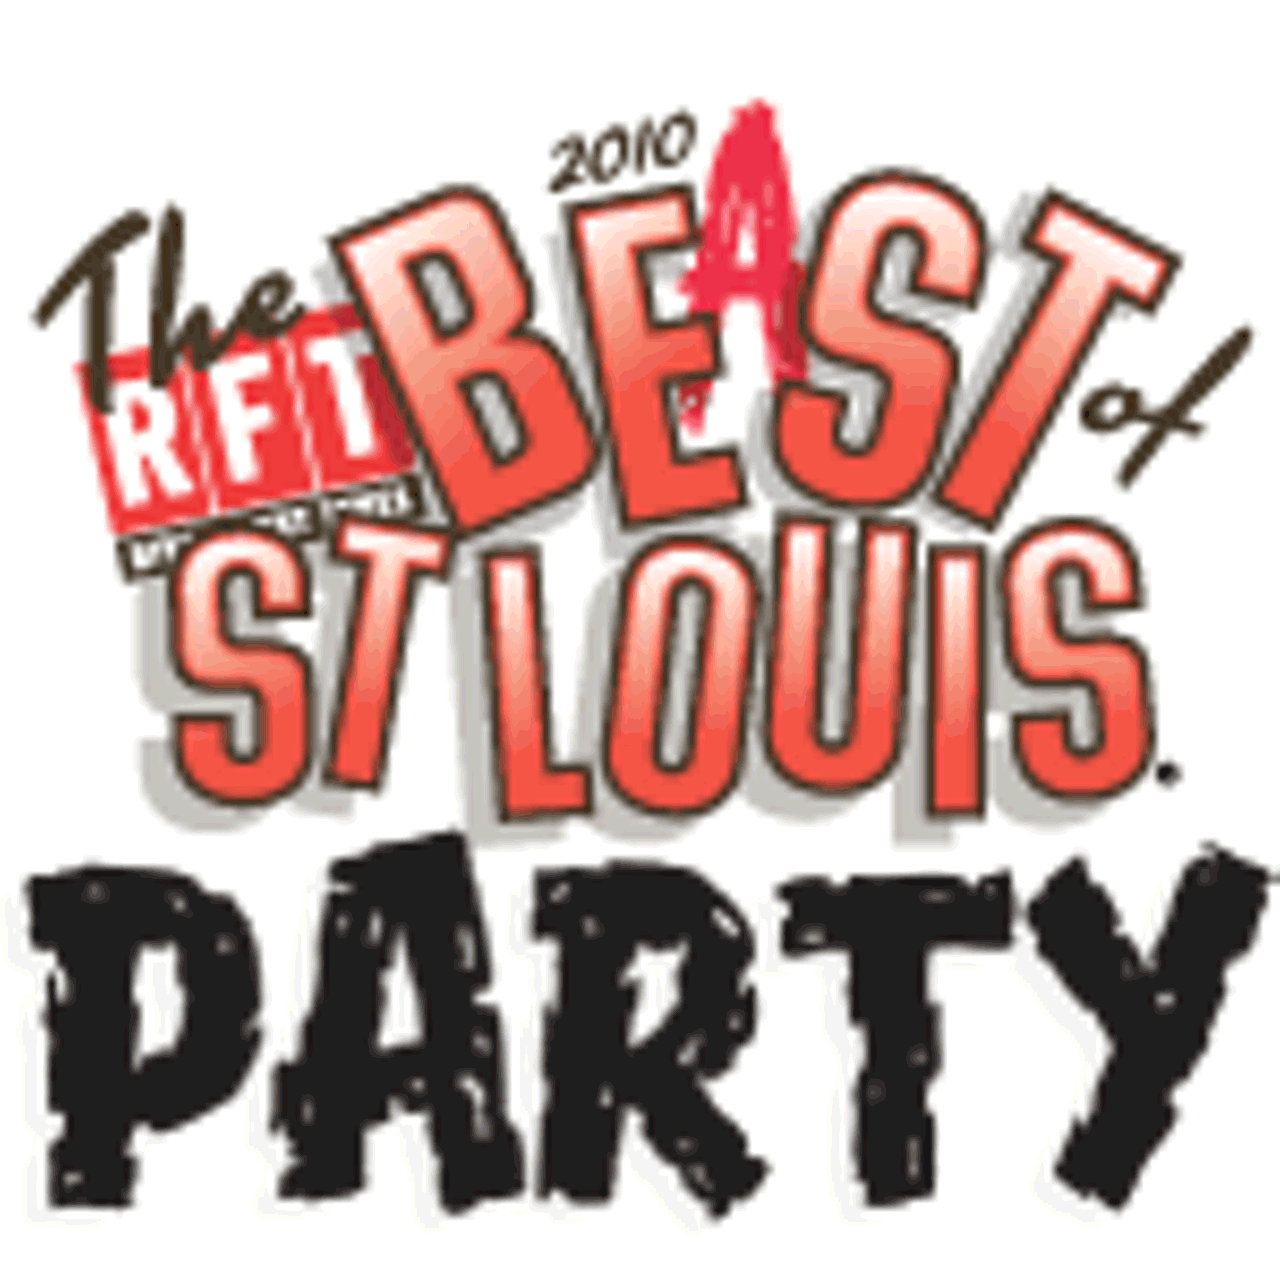 RFT BeAst of St. Louis Party!